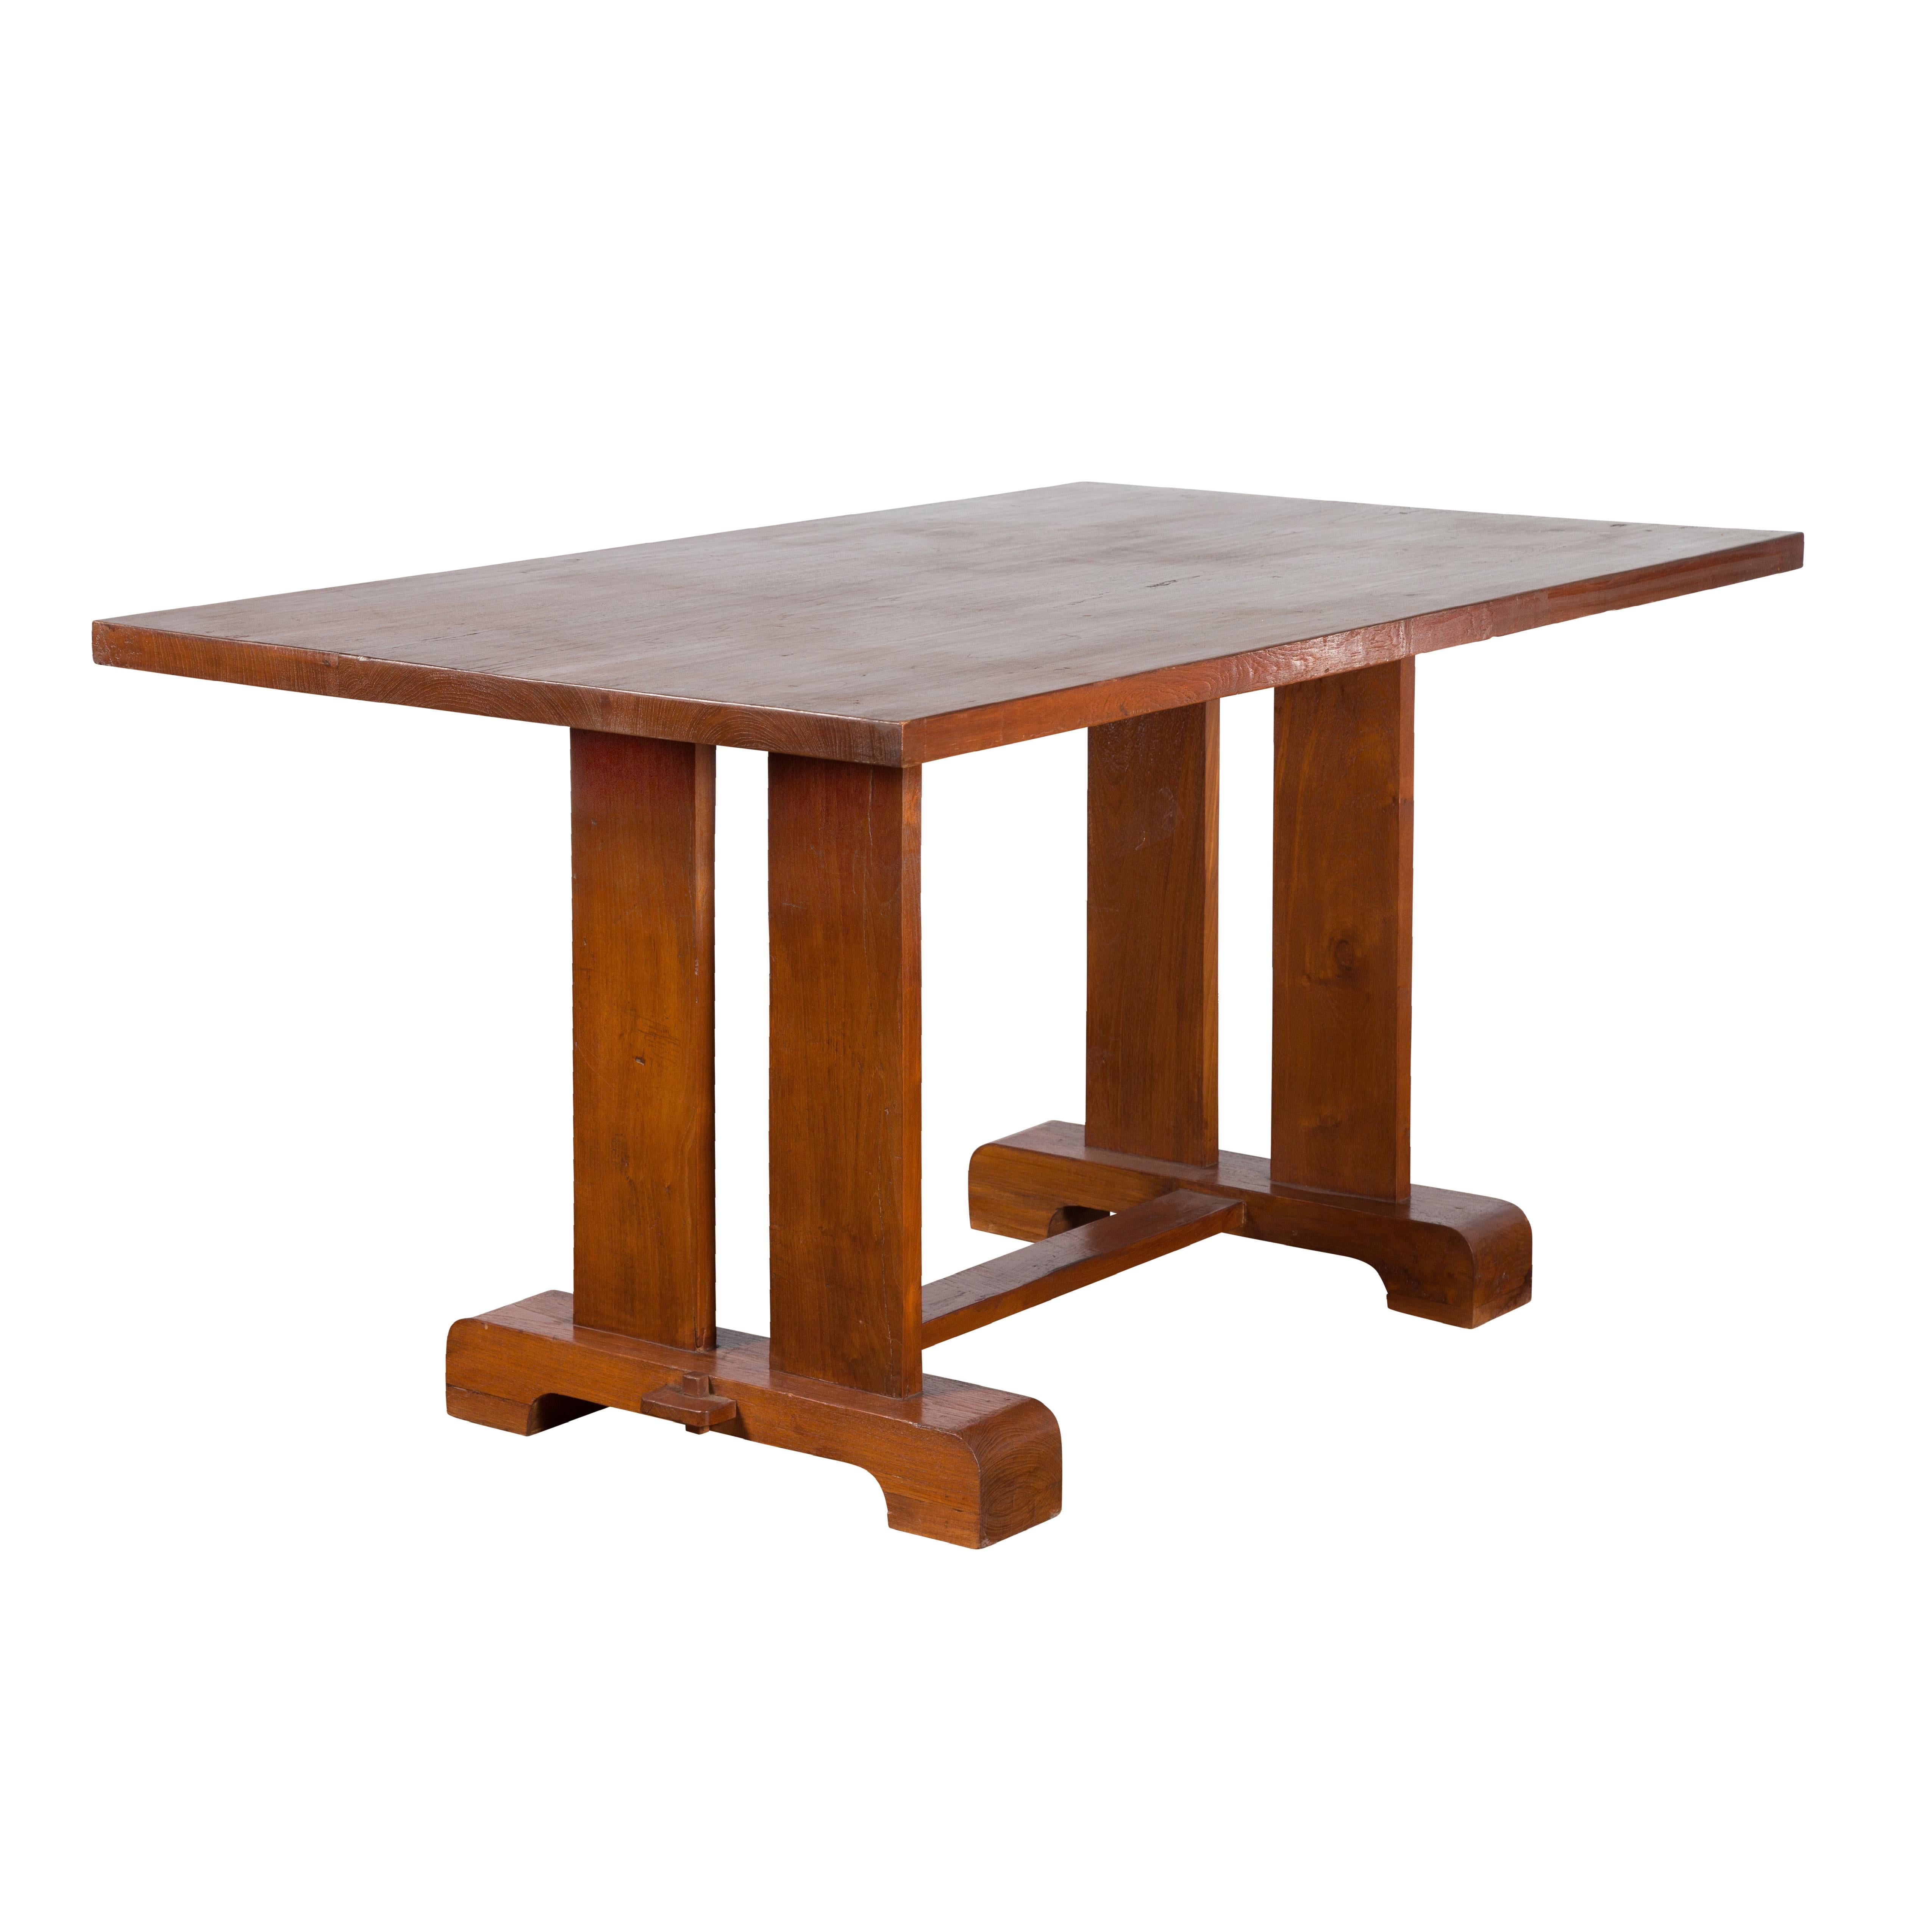 An antique Indonesian teak wood dining table from the early 20th century, with trestle base and brown patina. Created in Indonesia during the early years of the 20th century, this teak dining table features a rectangular top overhanging a simple